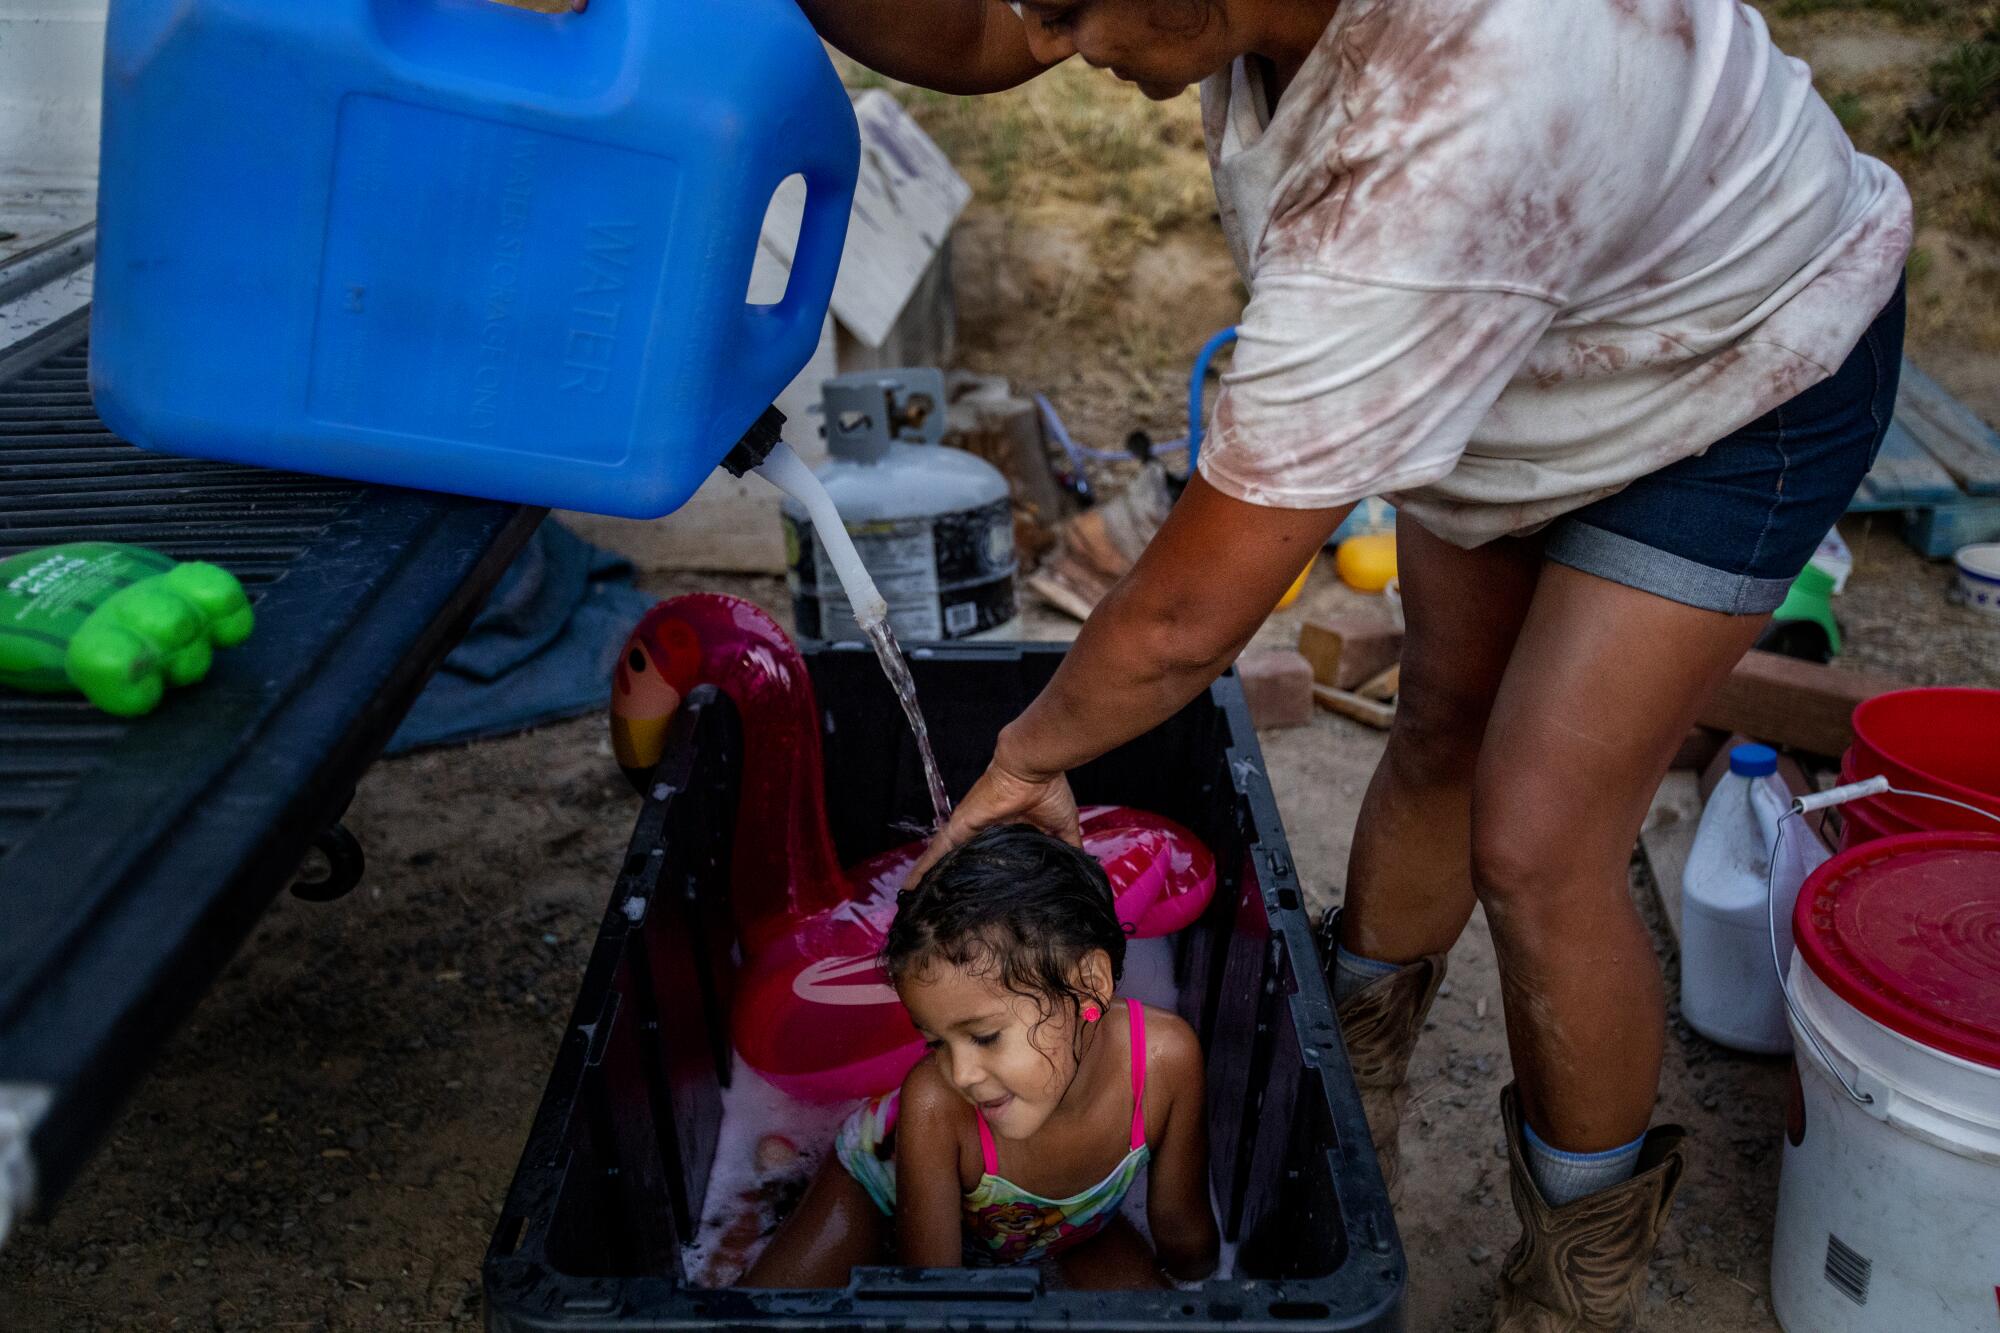 A woman bathes a young girl in a plastic bin